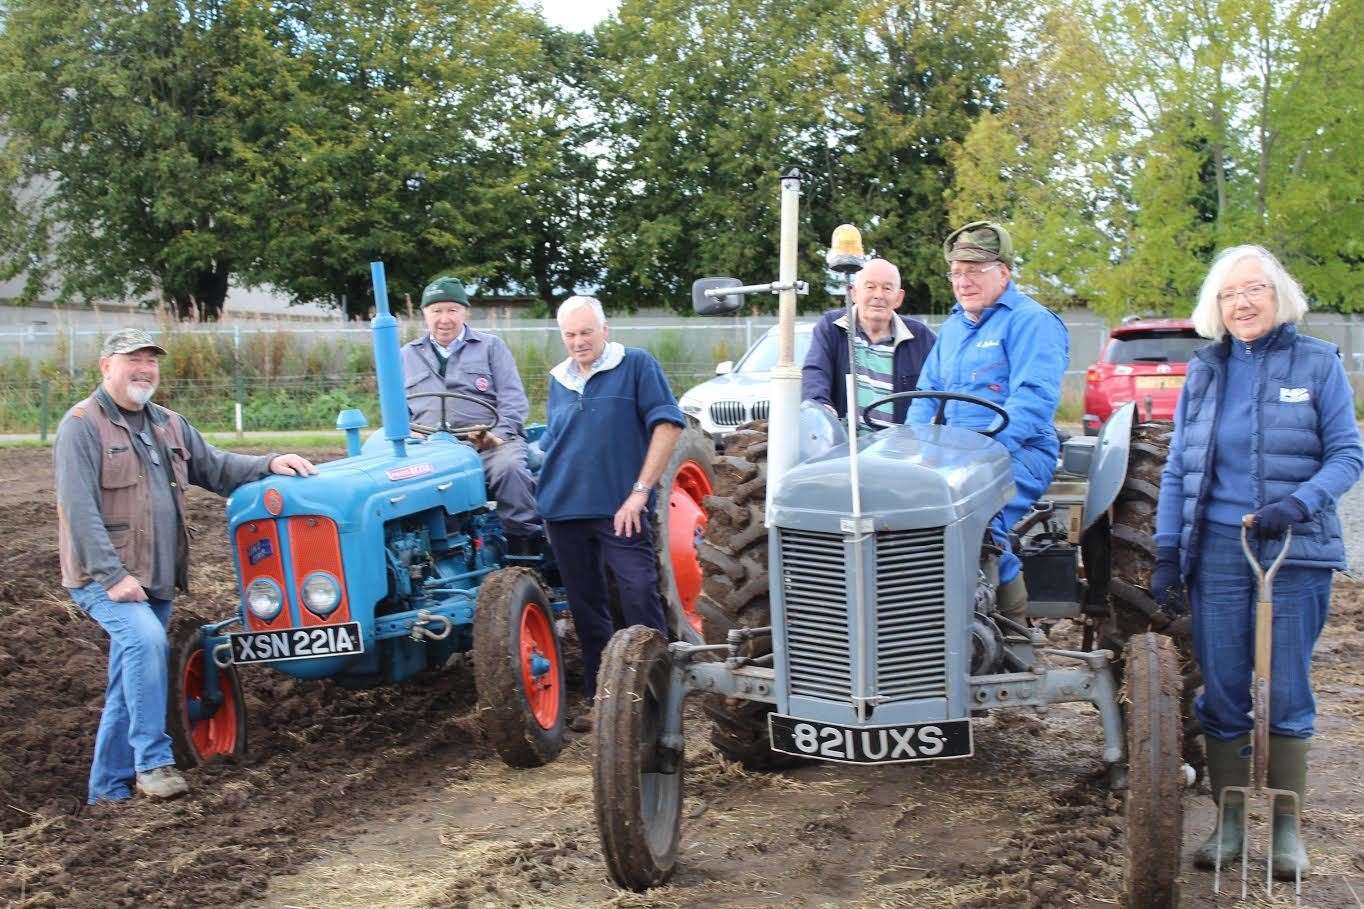 Members of Inverurie and District Mens Shed - Graeme Shepherd, Doug Scott, Henry Wilson, Alex Smith, Bob Shepherd and supporter Gwen Wilson - enjoyed the first ploughing session at the new plot. Picture: Griselda McGregor